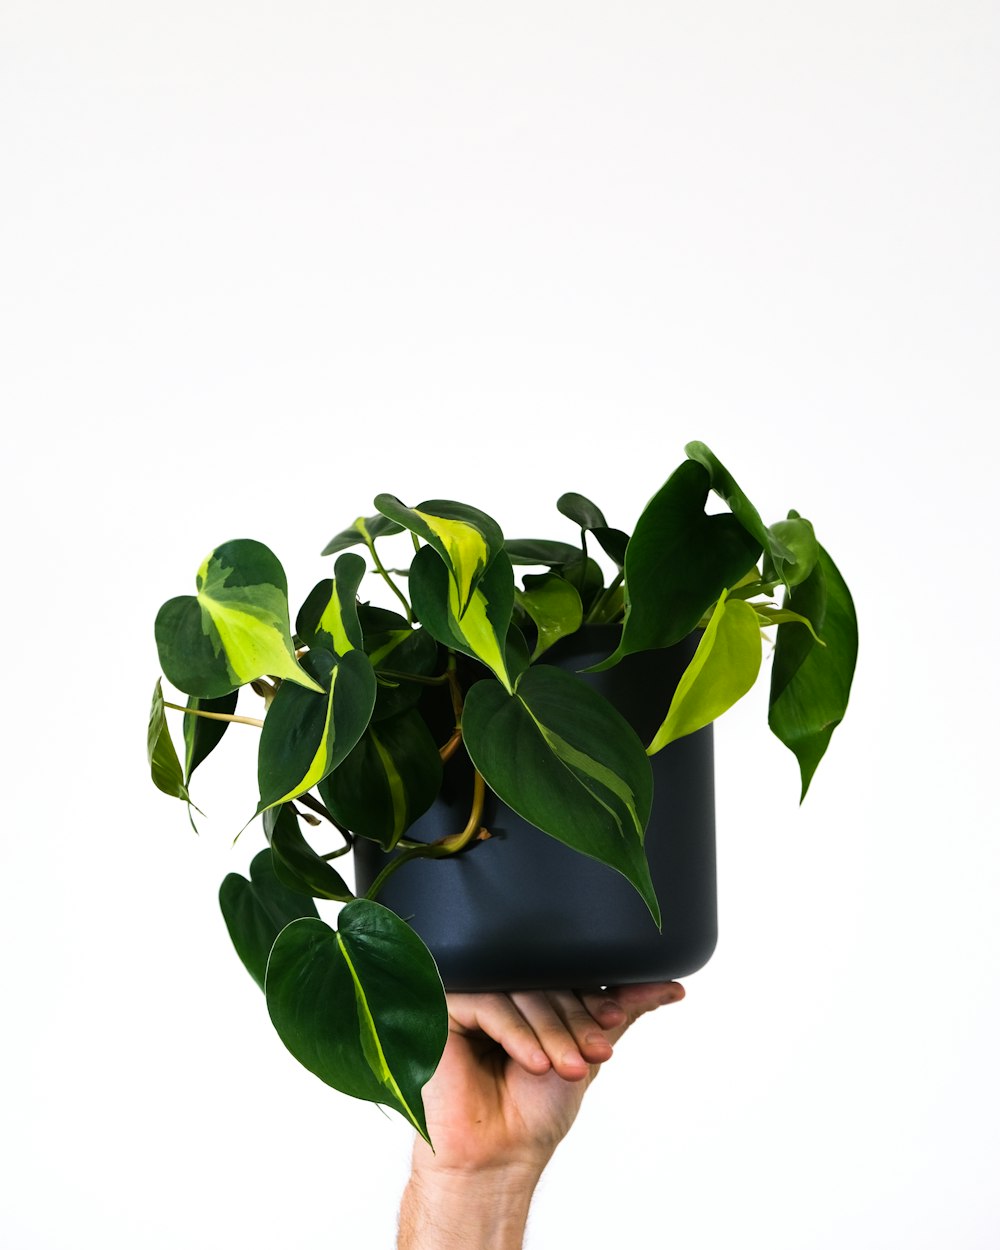 a hand holding a potted plant with green leaves